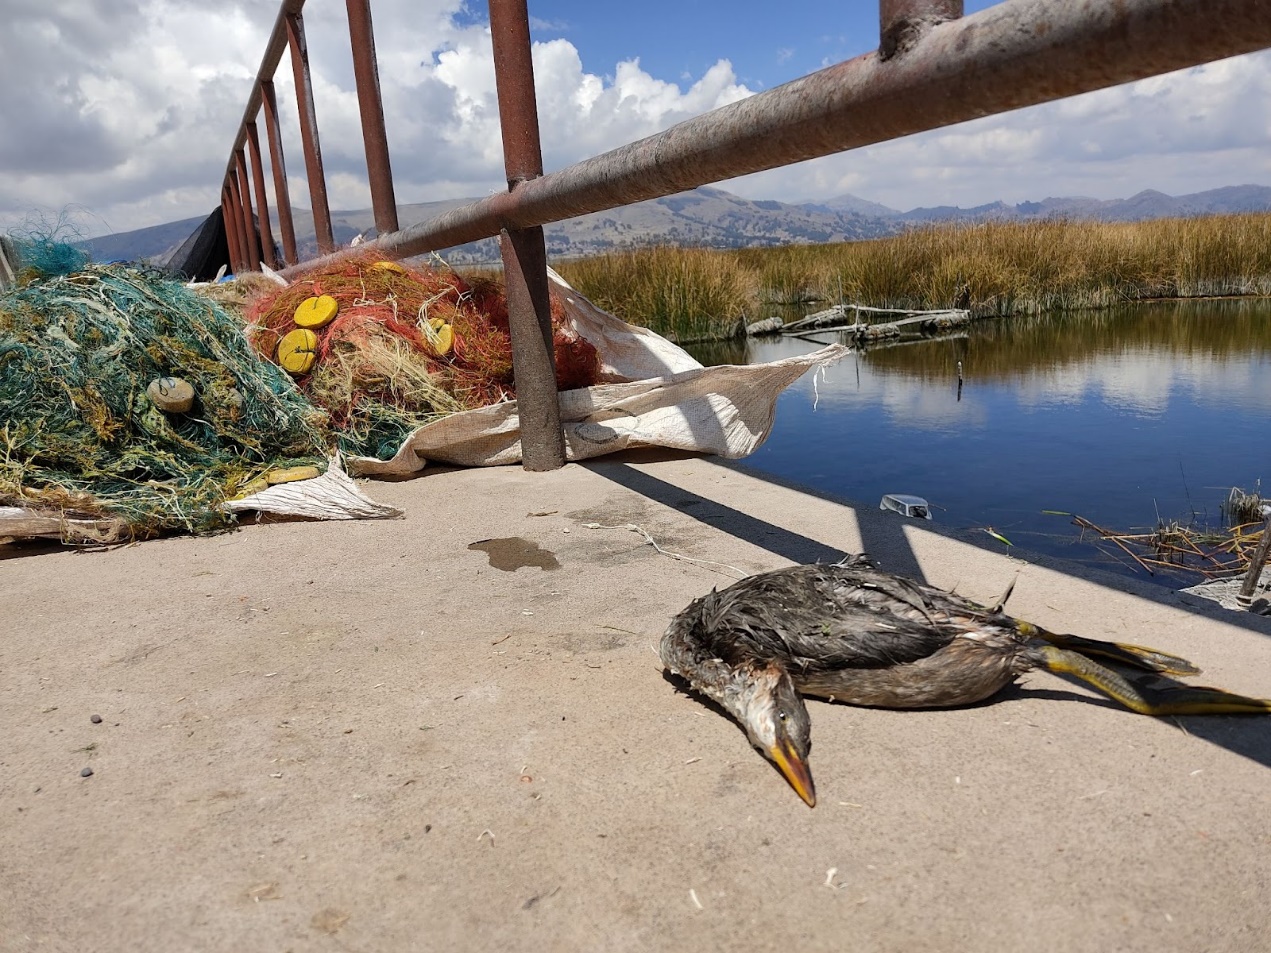 Titicaca Grebe found dead in Karana’ port, and gill nets commonly used for fishermen in green and red behind the body